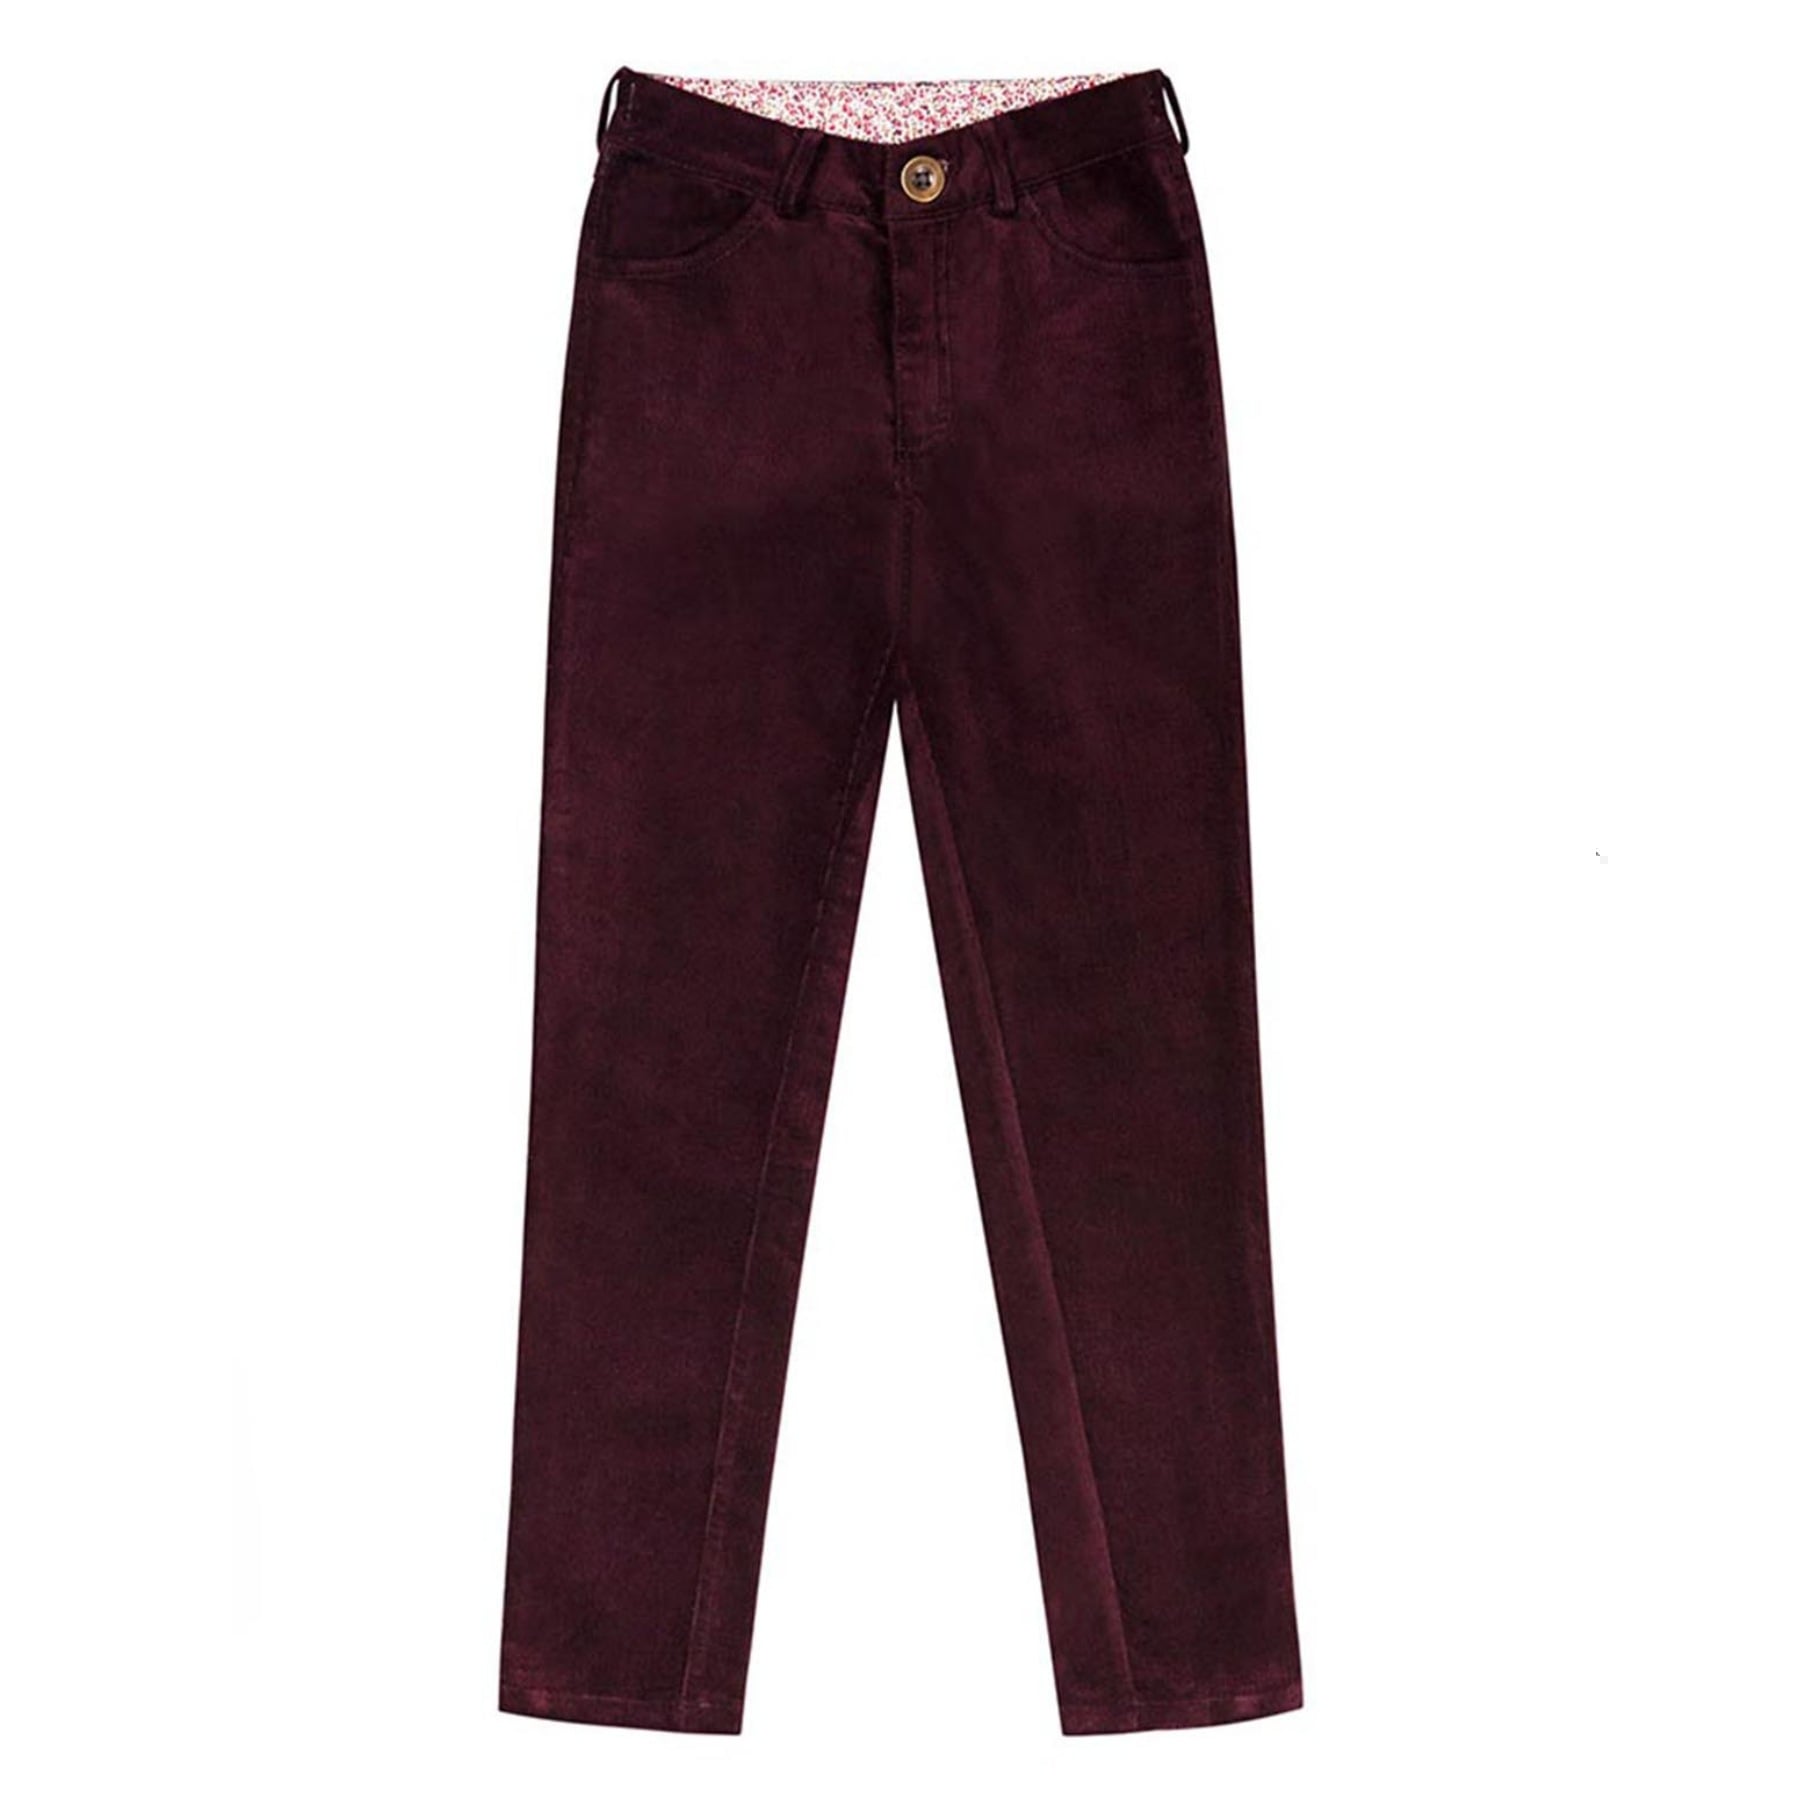 Nice burgundy plum pants for girls from the children's fashion brand La Faute à Voltaire